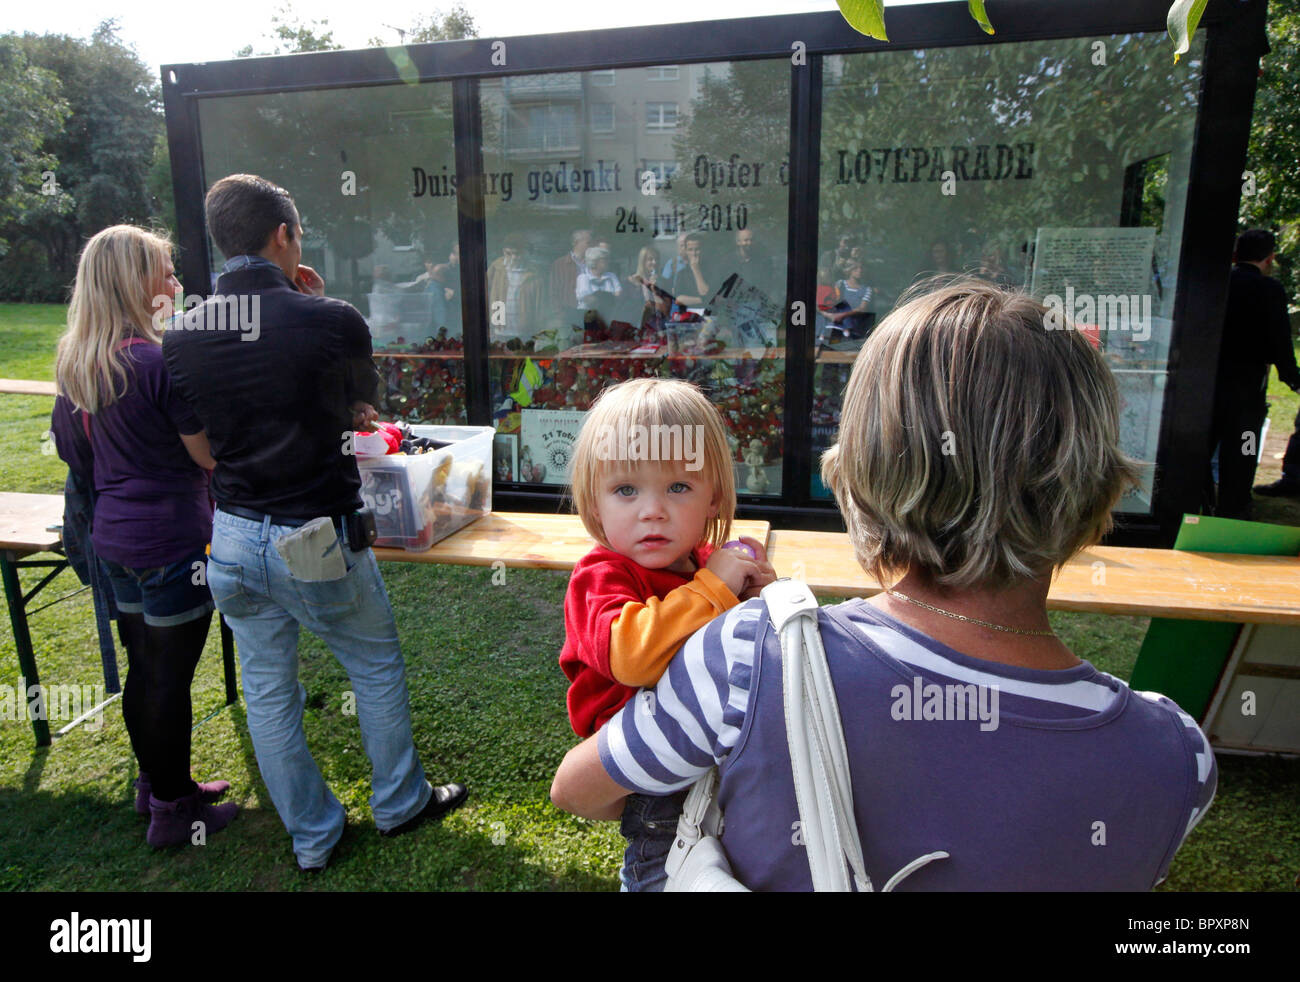 Duisburg Loveparade 2010: Glass cube at the site of the tragedy in which sorrow gifts, candles and toys are kept to remember Stock Photo